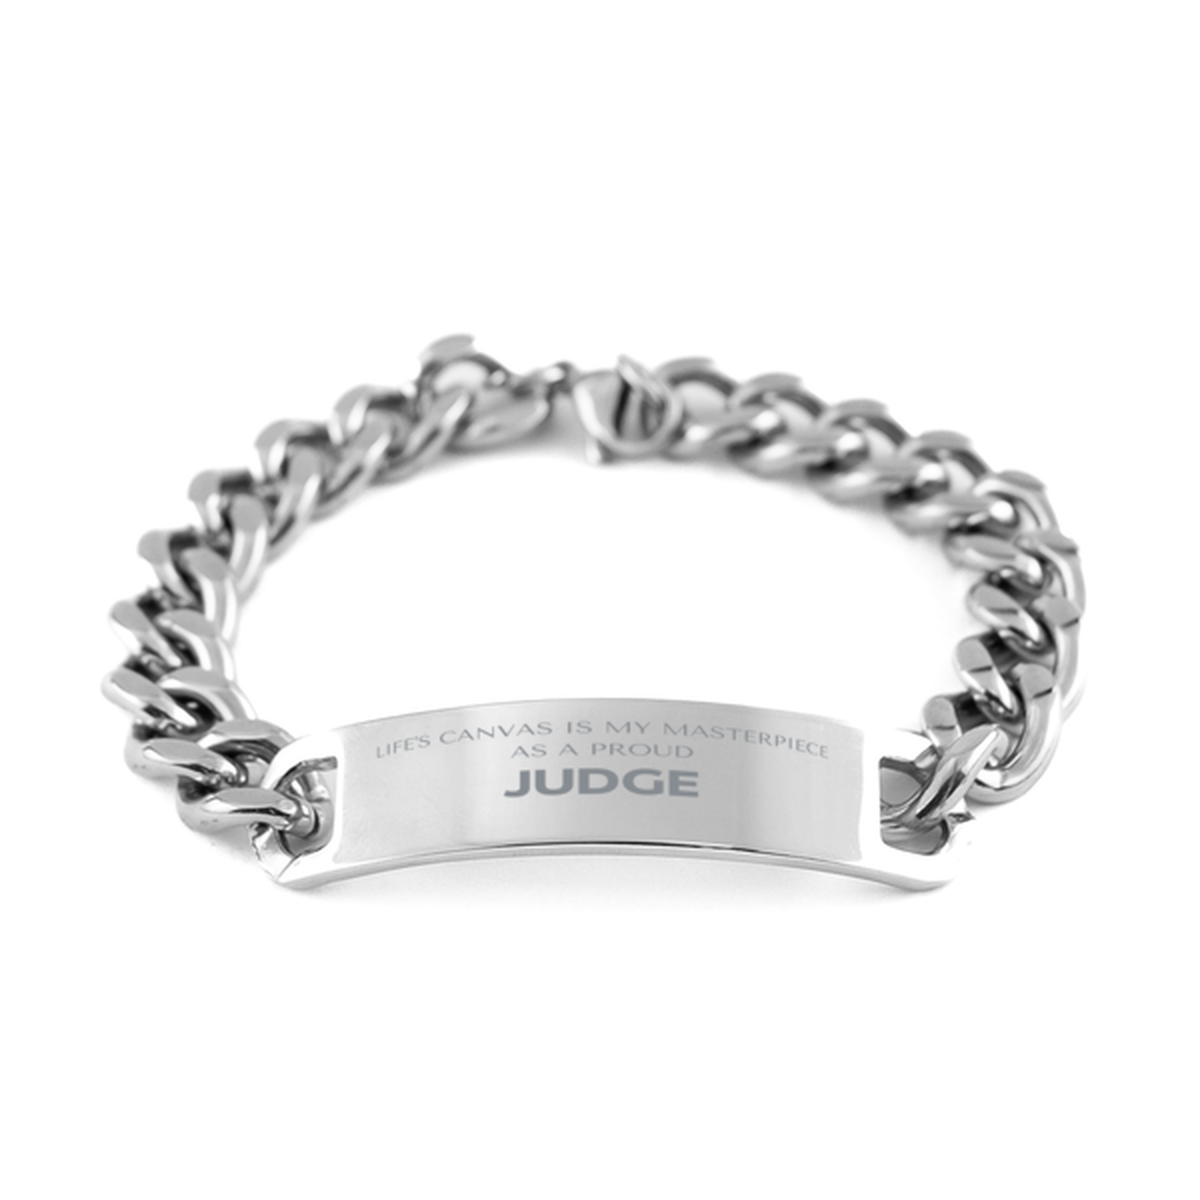 Proud Judge Gifts, Life's canvas is my masterpiece, Epic Birthday Christmas Unique Cuban Chain Stainless Steel Bracelet For Judge, Coworkers, Men, Women, Friends